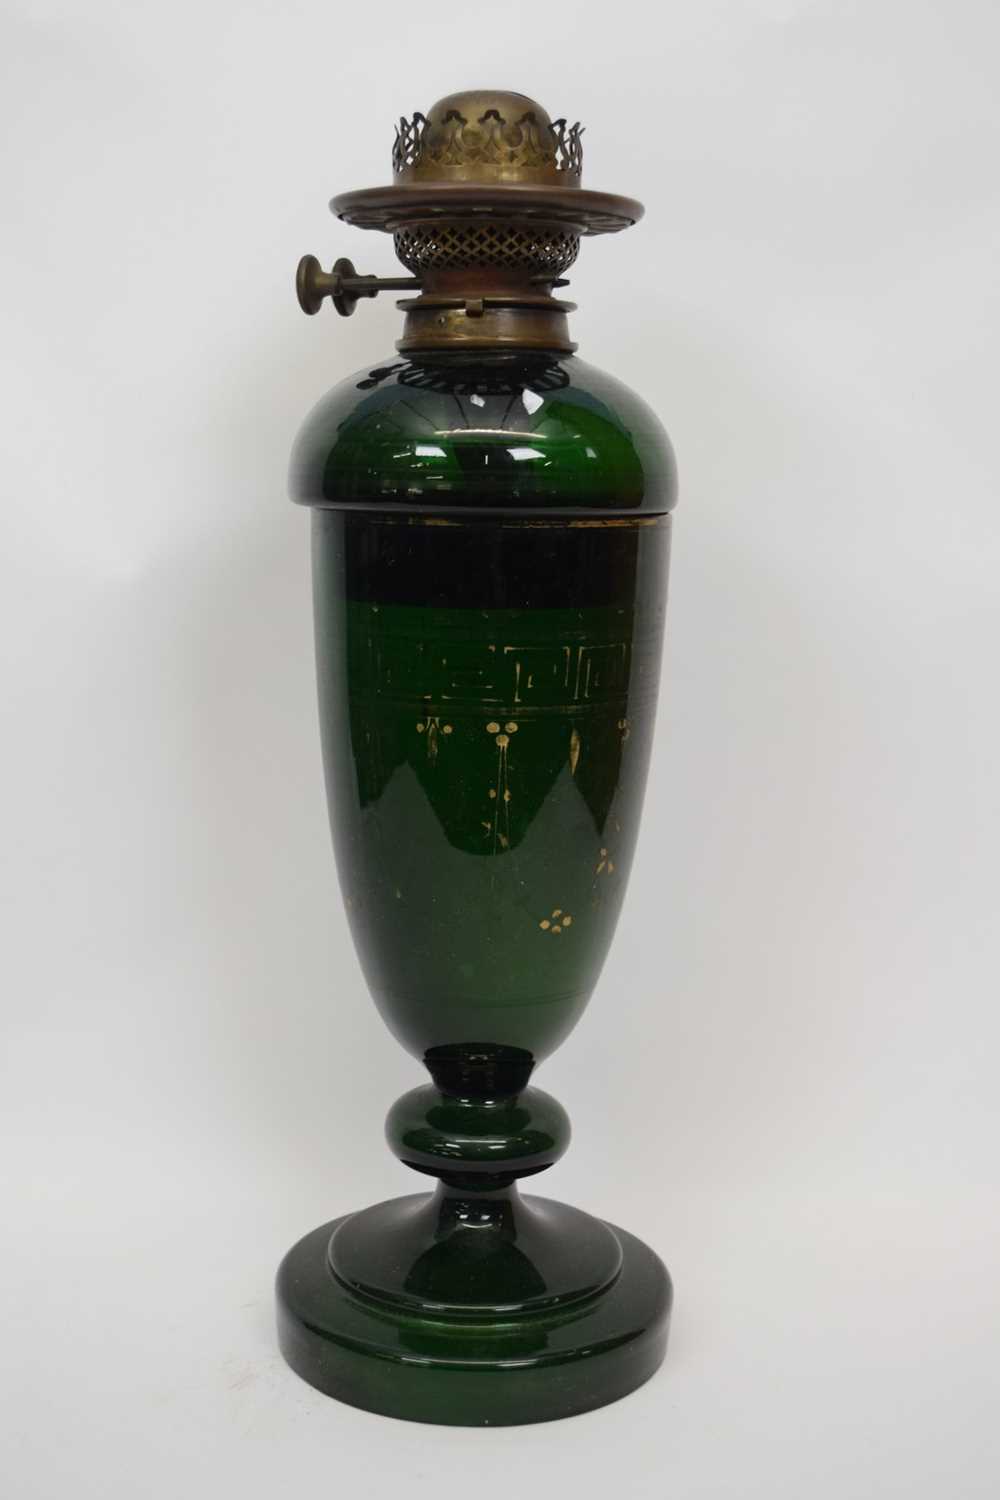 Oil lamp with glass reservoir with Grecian style design (rubbed) - Image 2 of 3